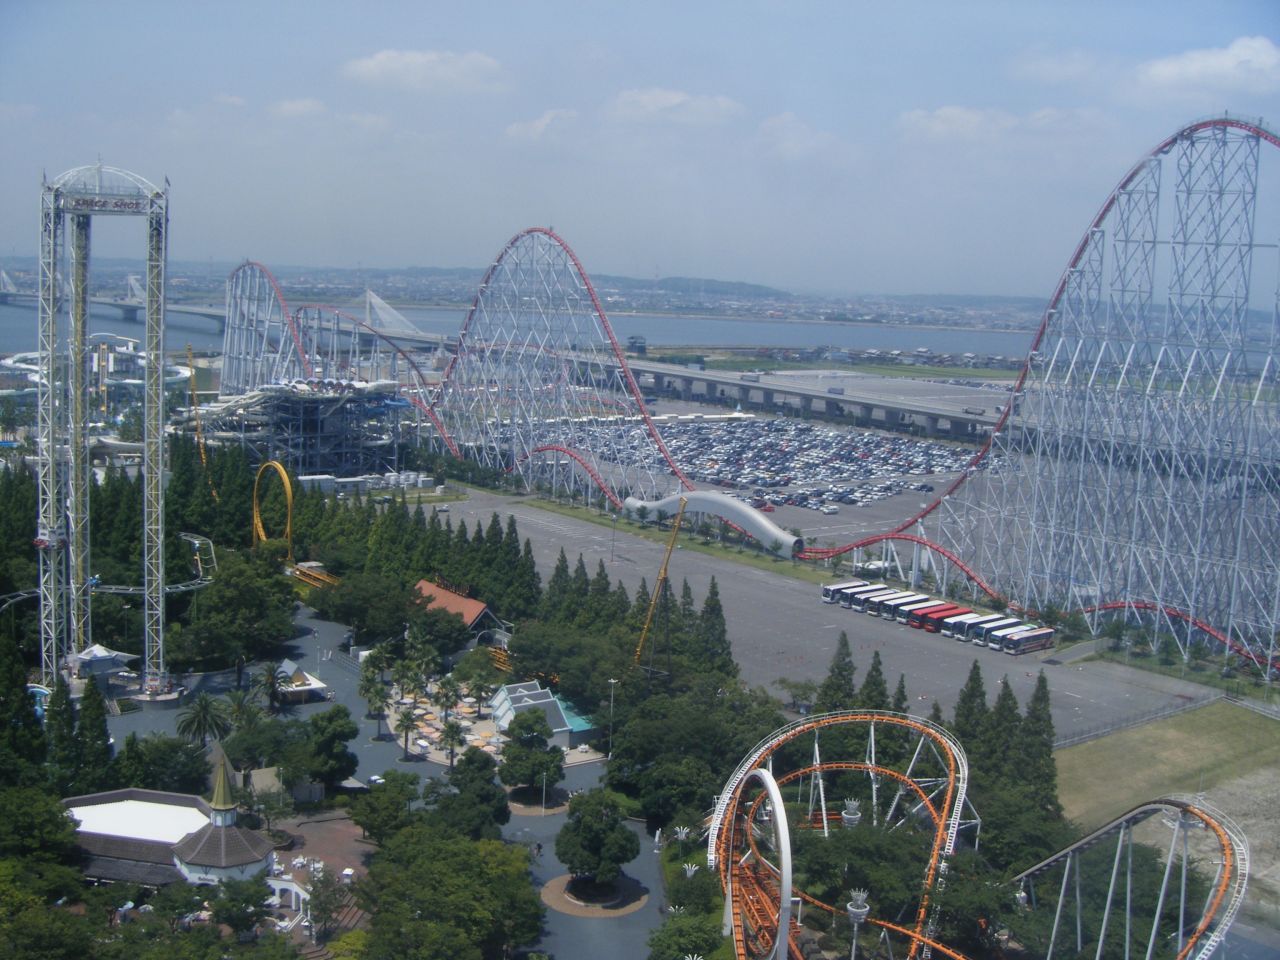 The Steel Dragon roller coaster is built for speed at Nagashima Spa Land in Kuwana, Japan. 